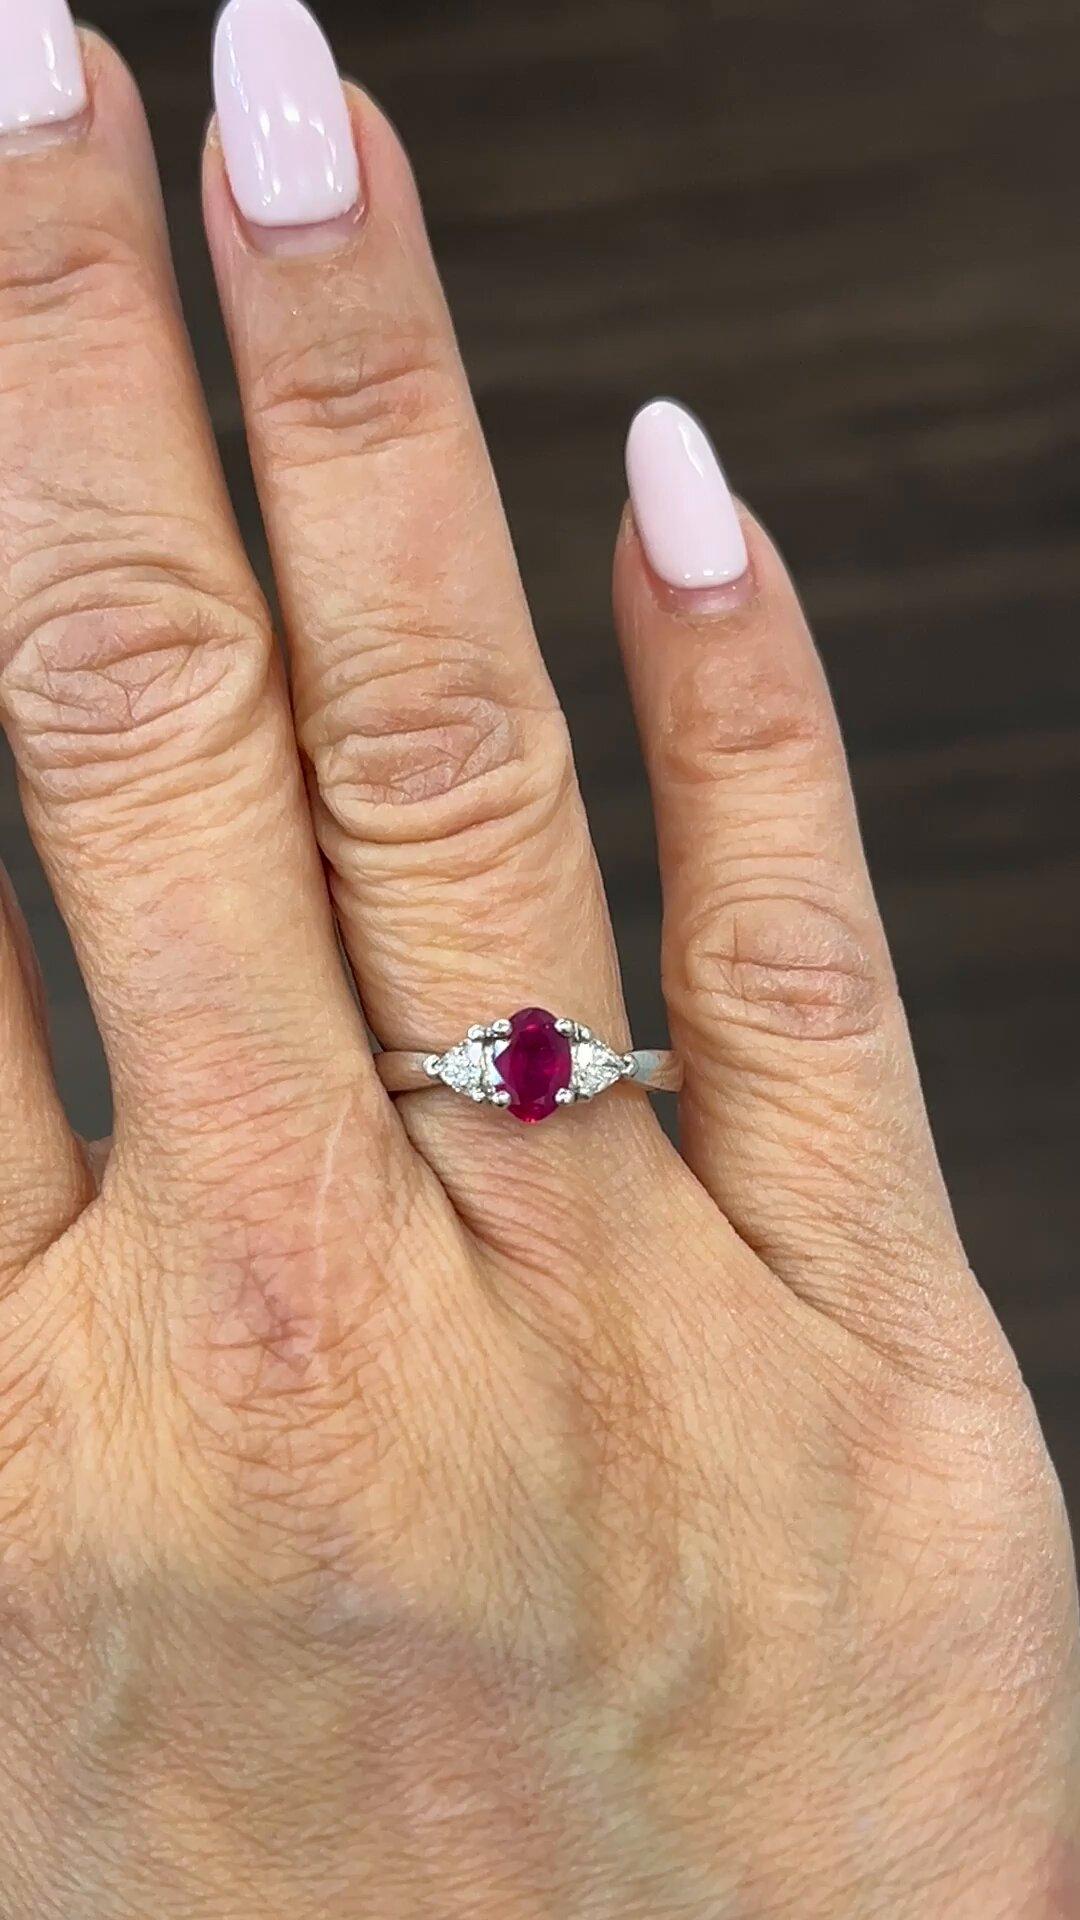 Adorn your finger with this stunning oval-shaped ring that features a 0.87 ct Ruby as the main stone and diamonds as secondary stones. The metal used in crafting this exquisite jewelry is platinum, making it resilient and long-lasting. This ring is